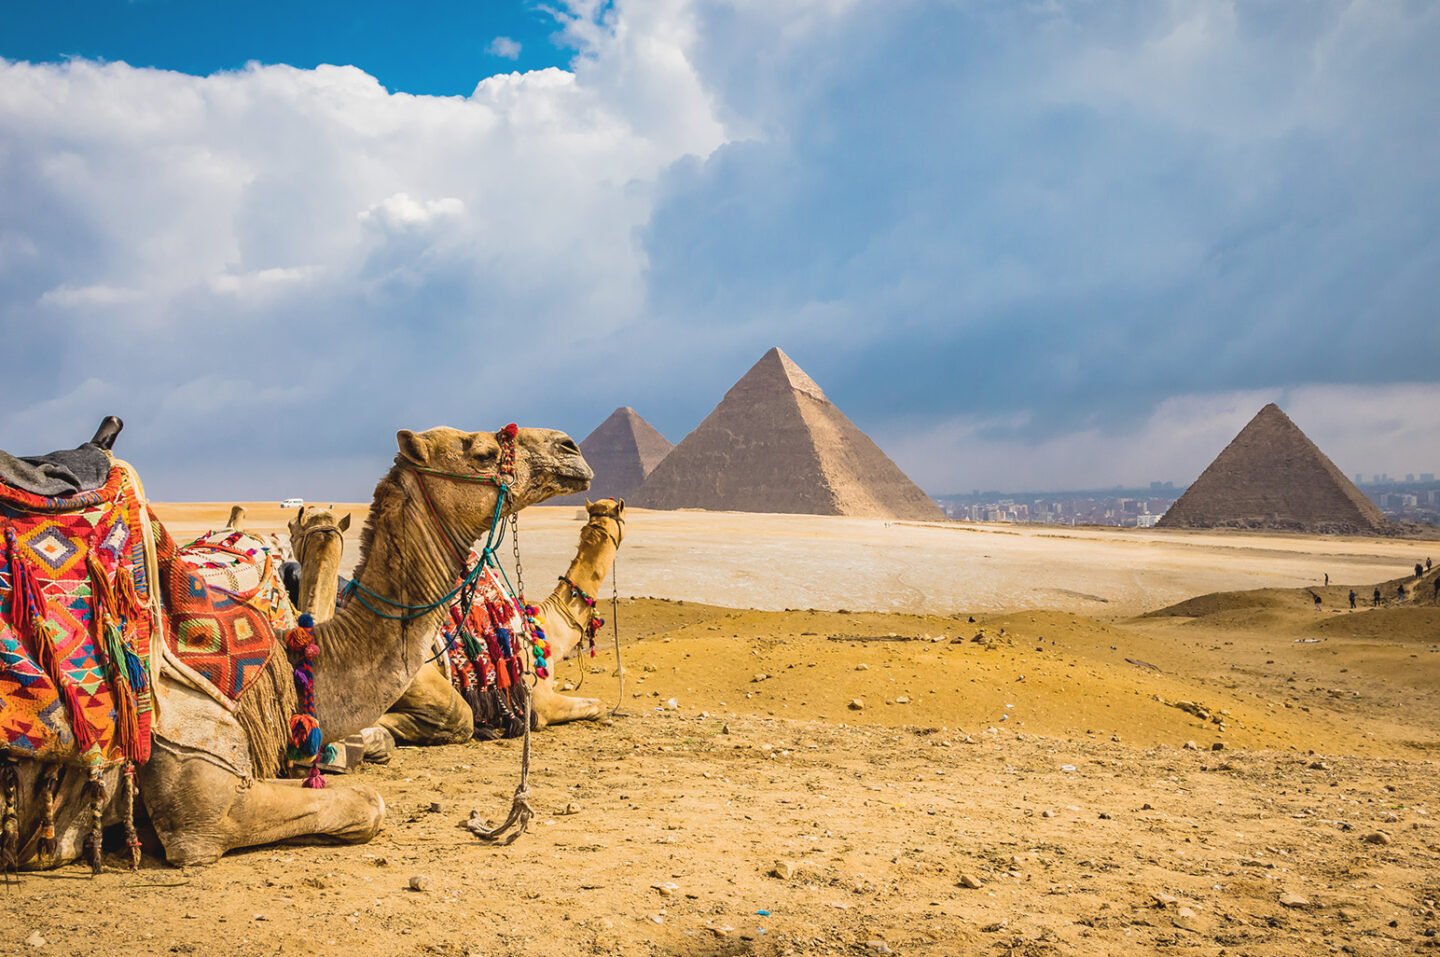 7 Awe-Inspiring Things To See The Next Time You’re In Egypt